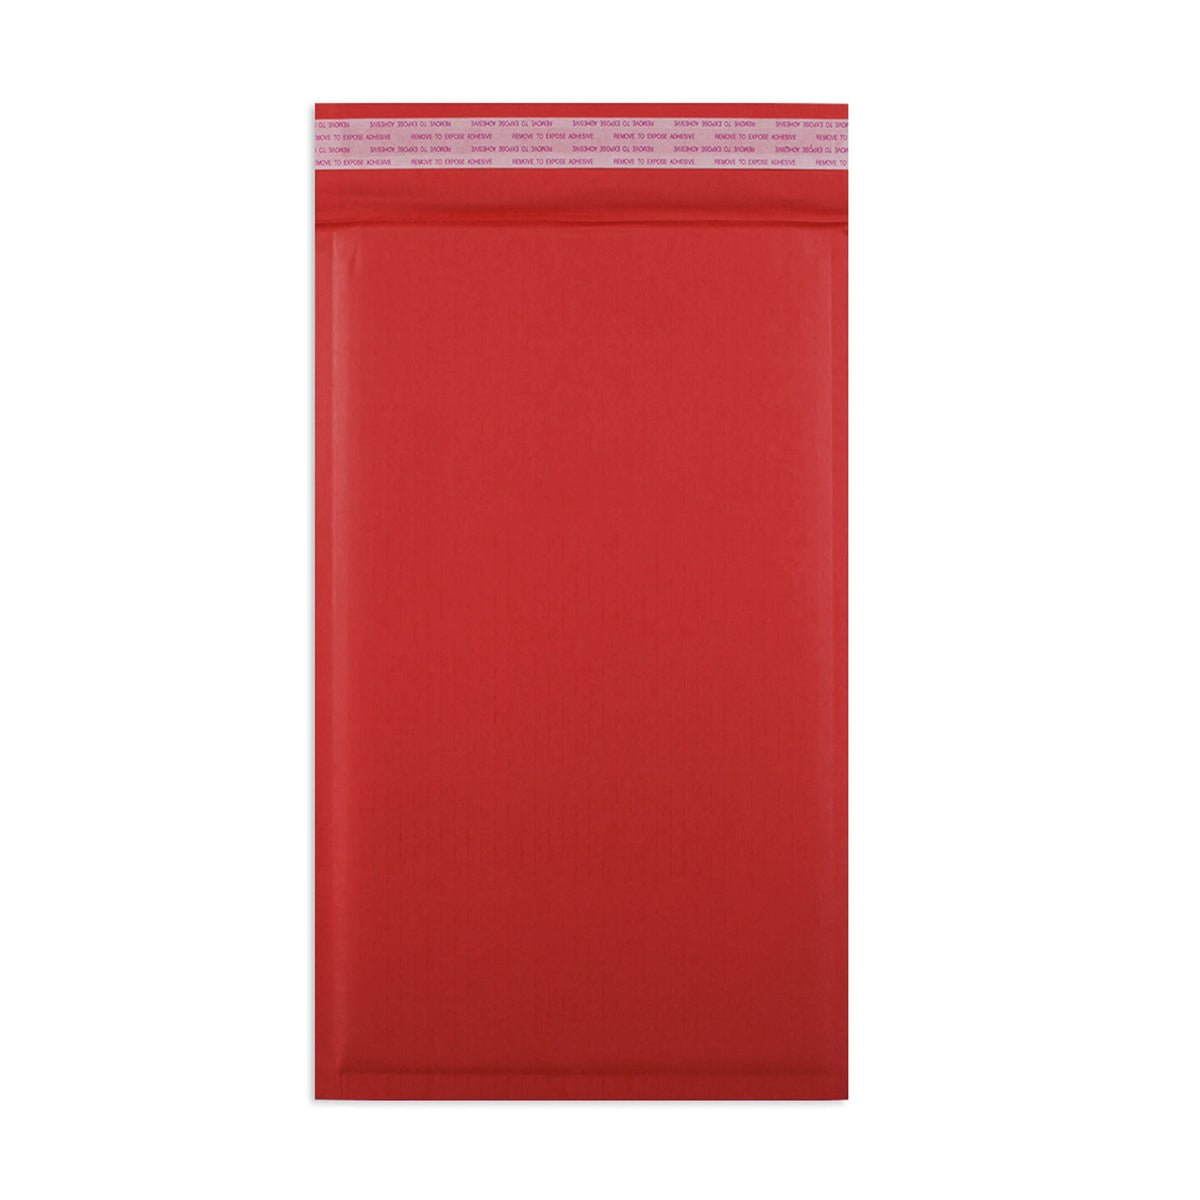 165 x 100mm Red 180gsm Recyclable Corrugated Bags [Qty 200] - All Colour Envelopes